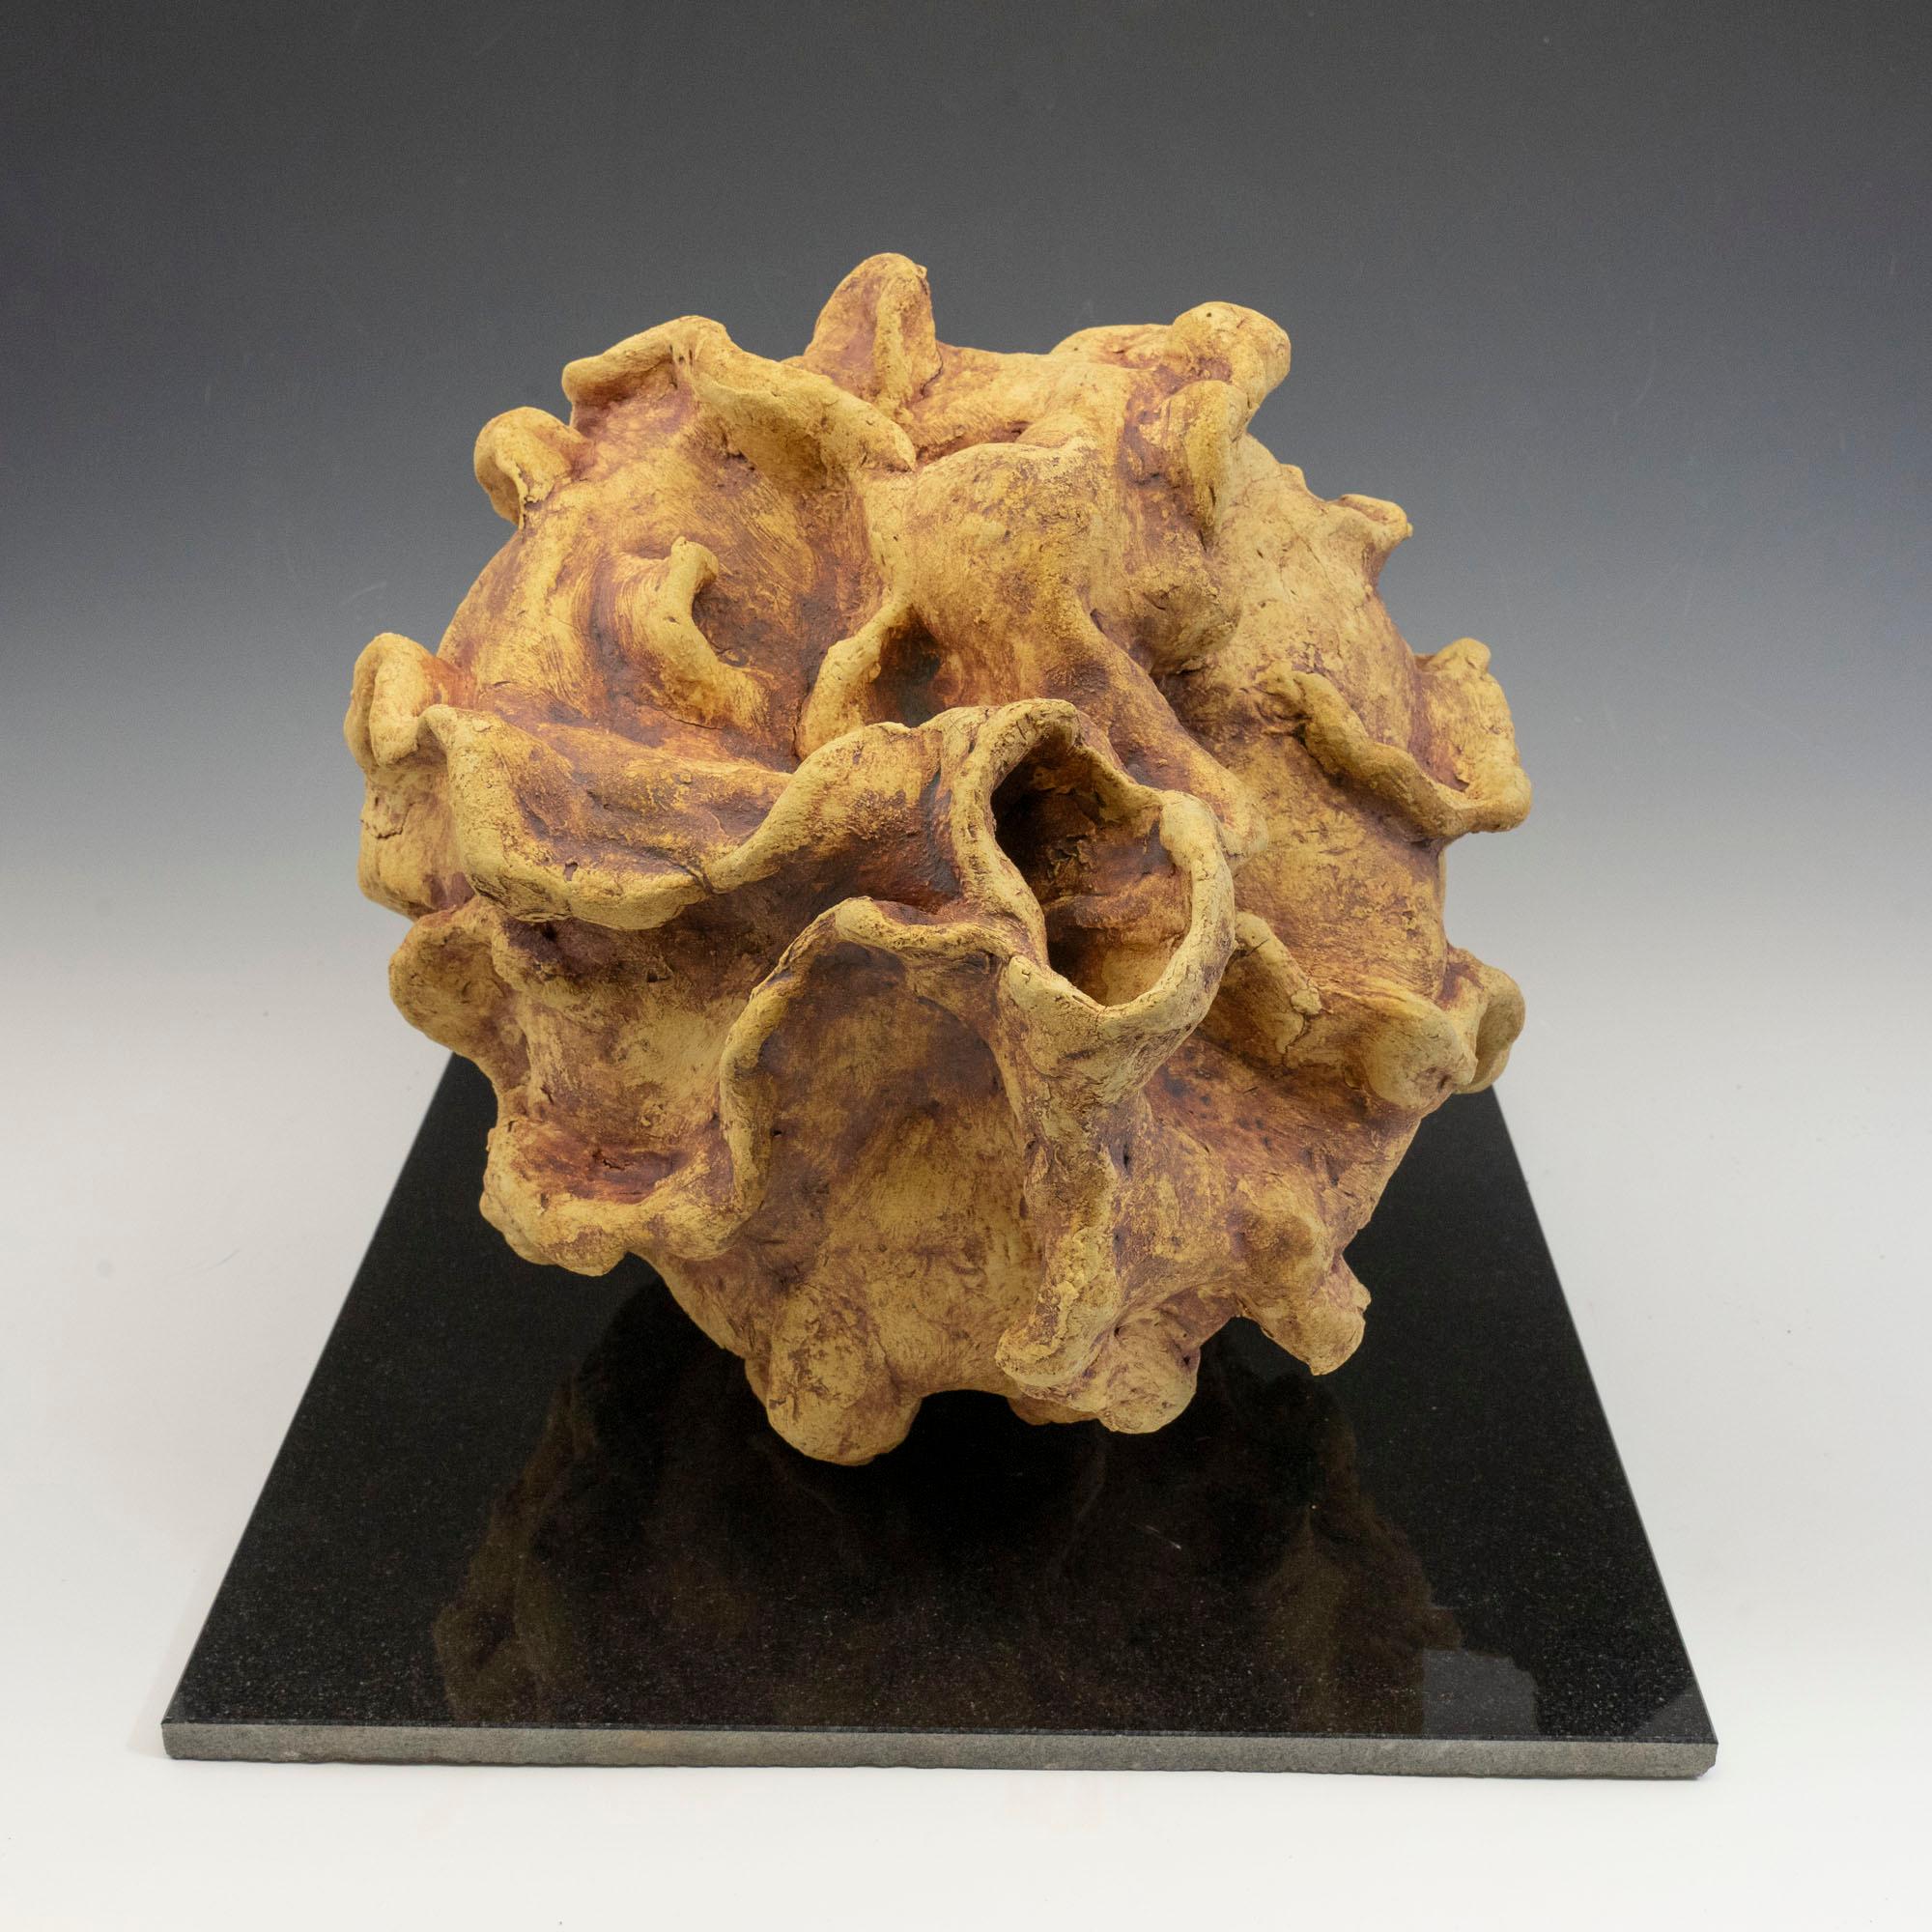 "Hiding Place", golden yellow textured ceramic, embodies the essence of clay  - Sculpture by Allan Drossman